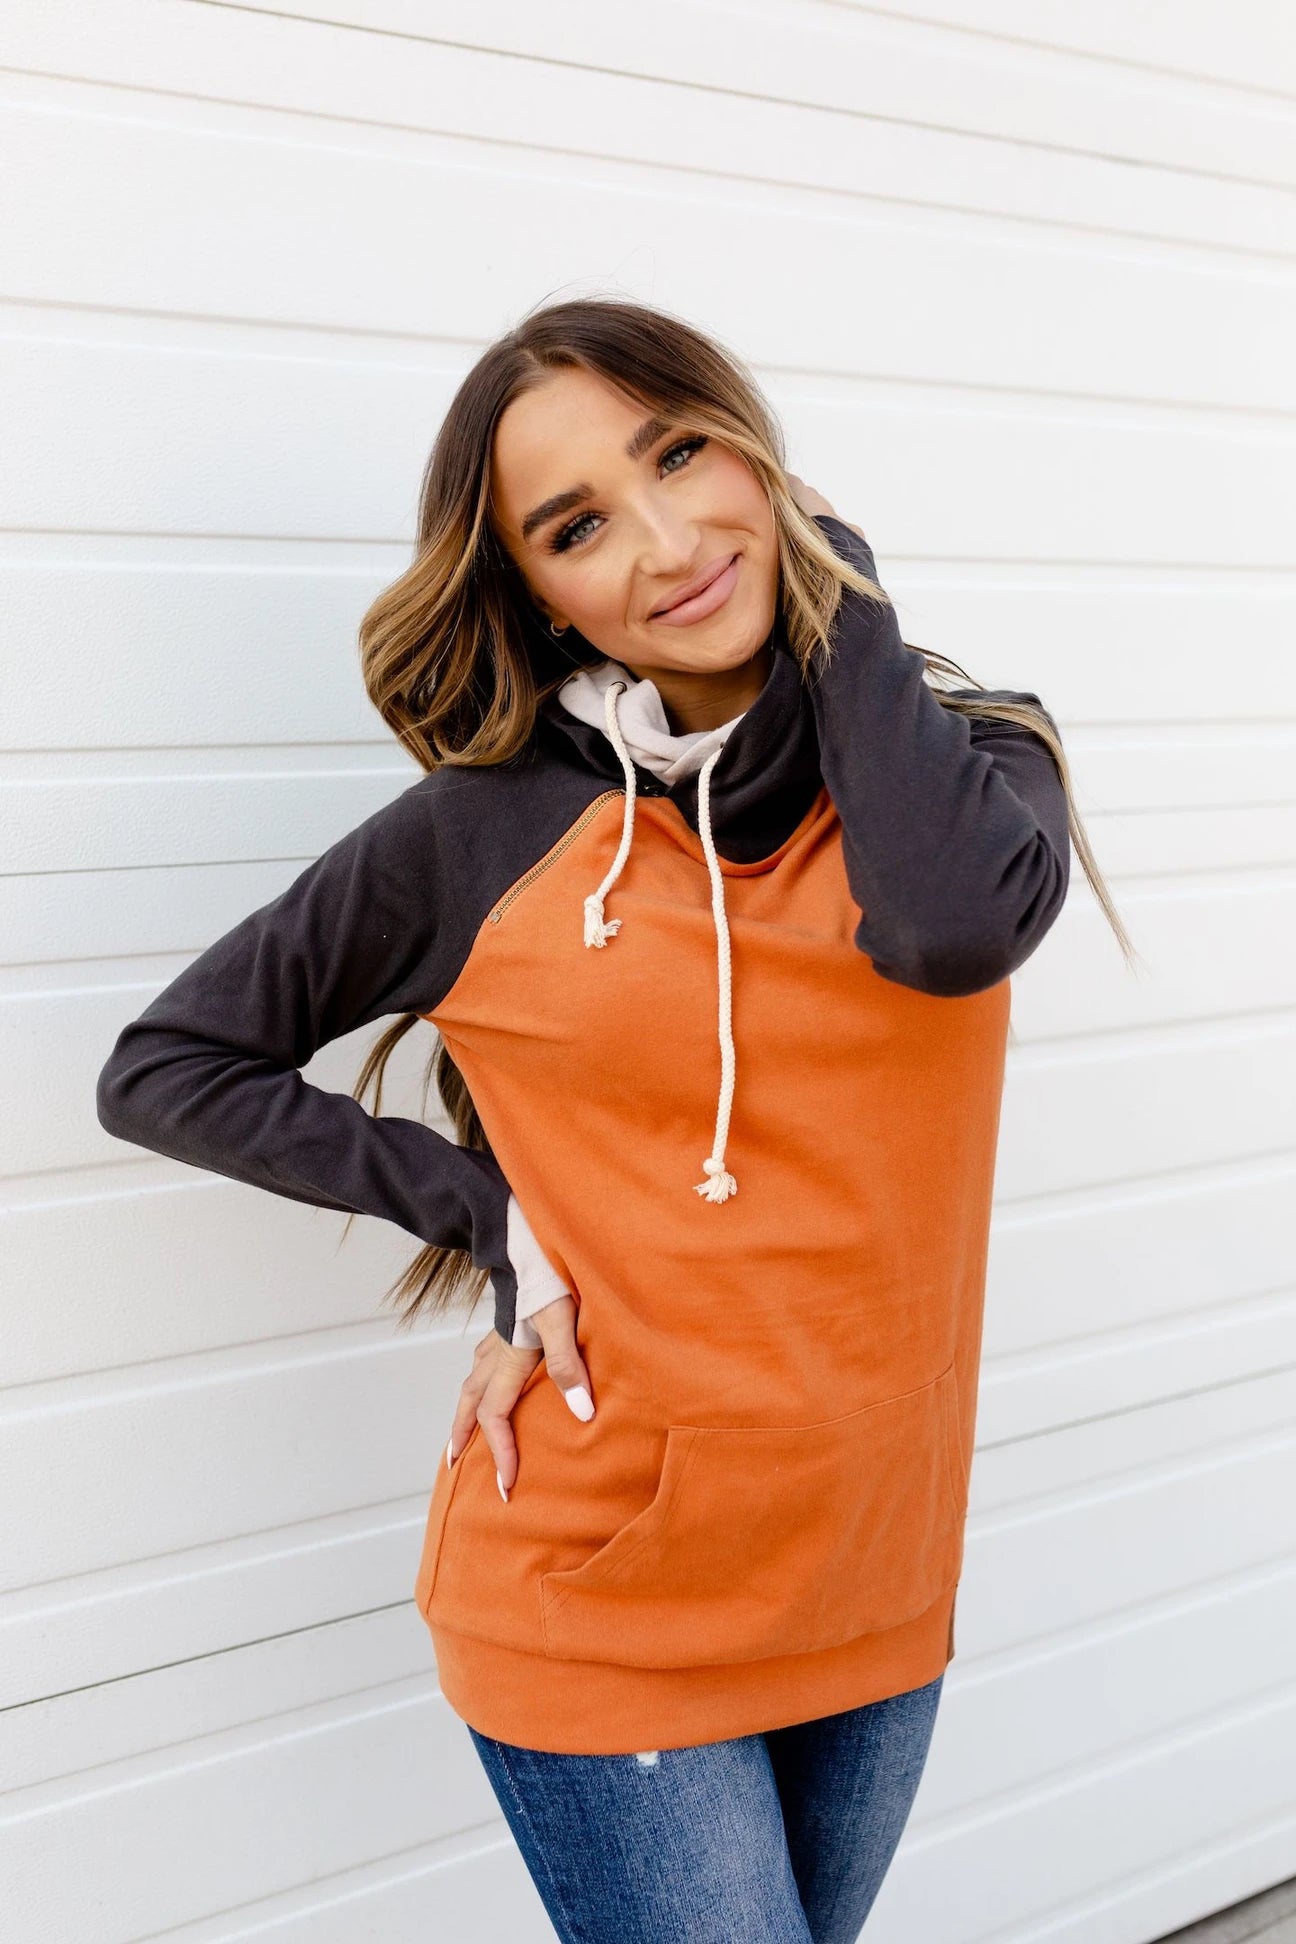 Ampersand Avenue Ampersand Avenue DoubleHood Sweatshirt - Happy Haunting available at The Good Life Boutique